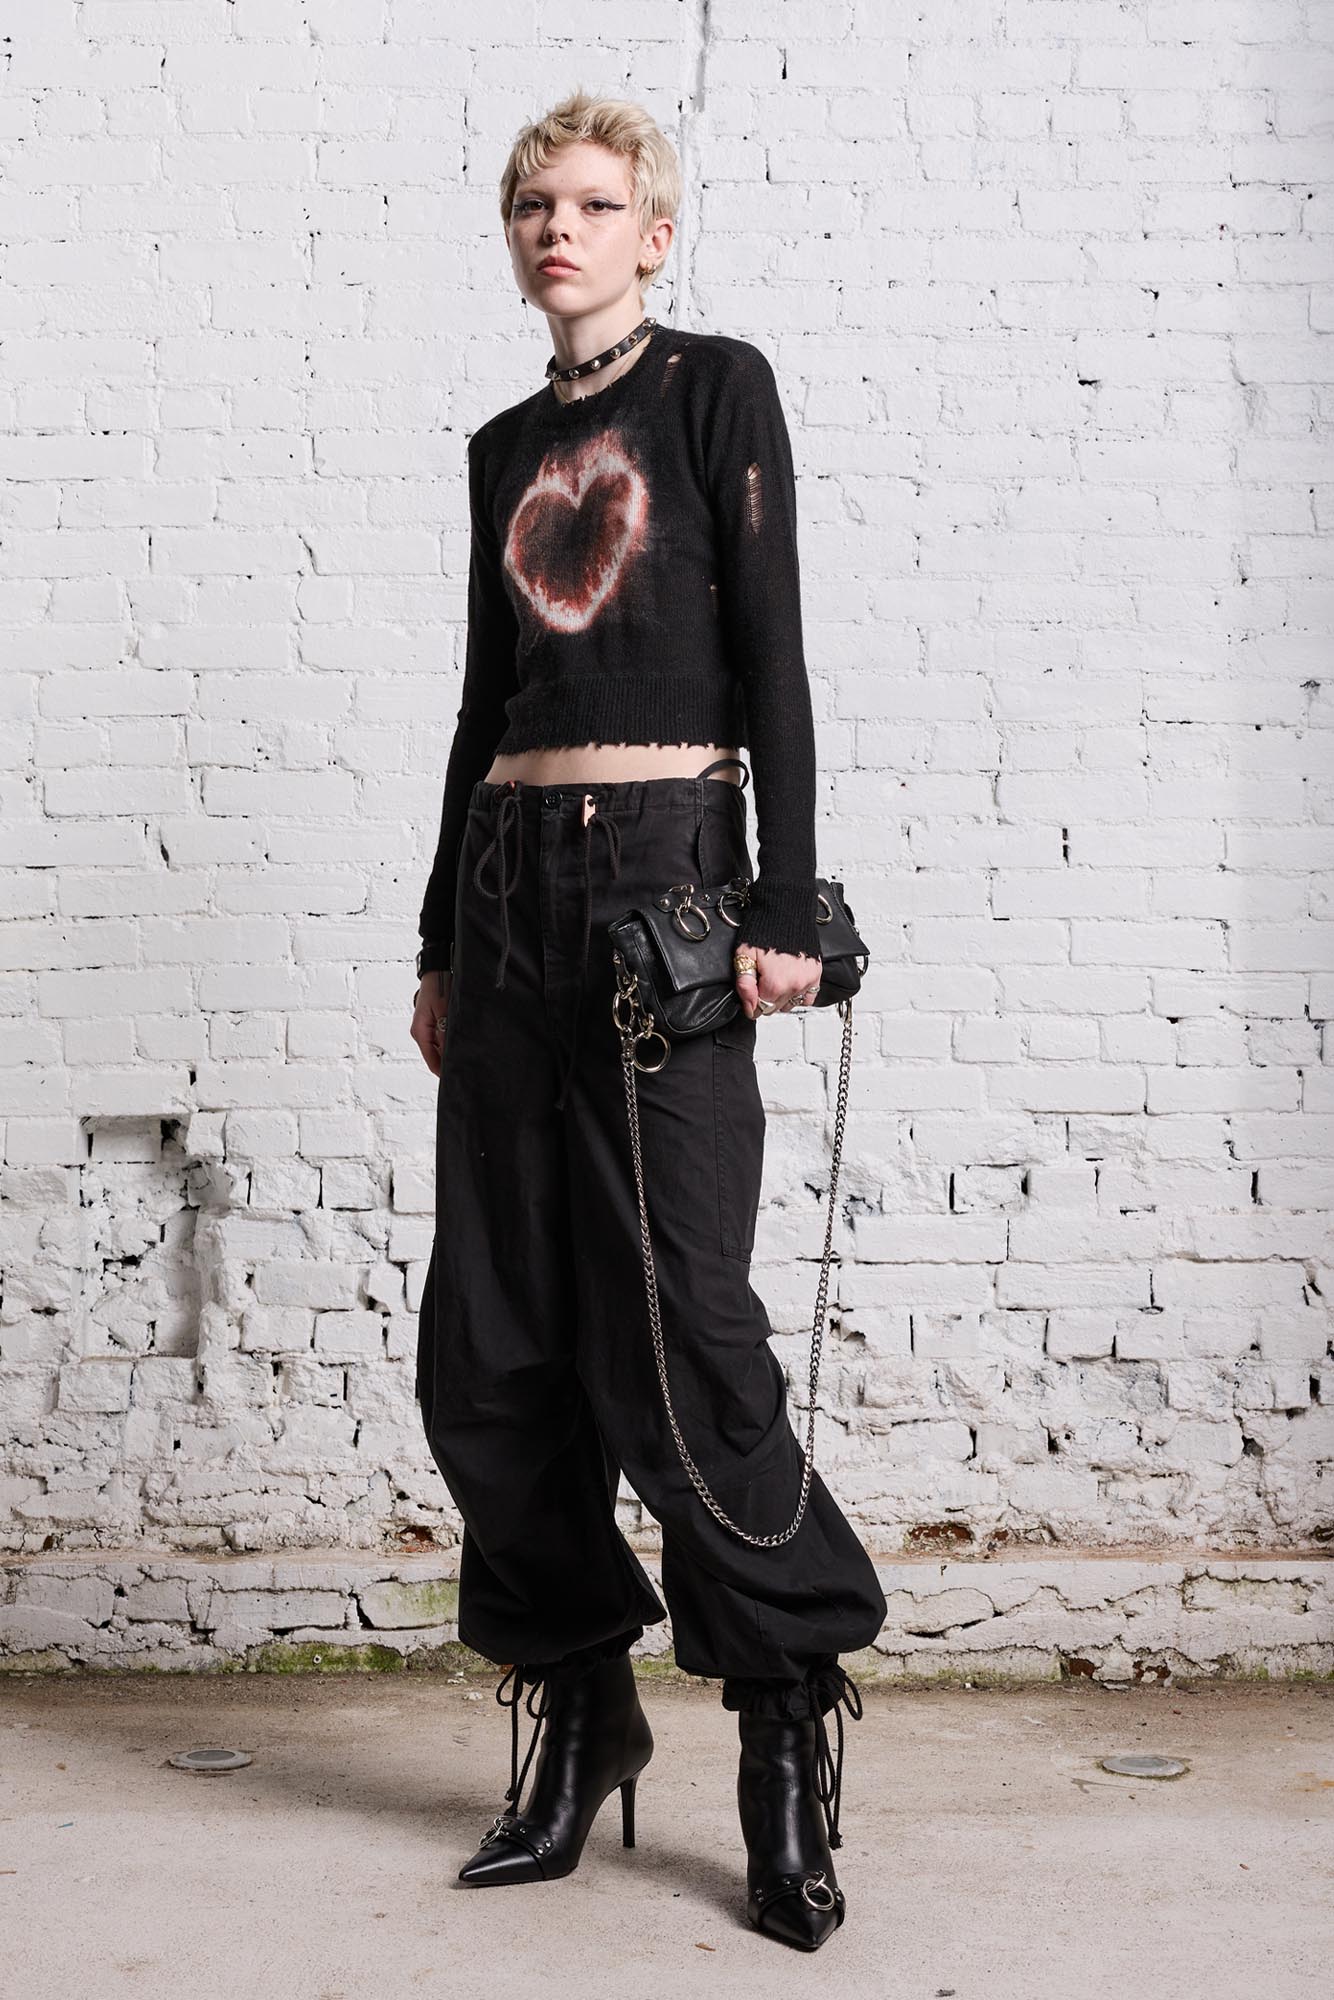 R13 Balloon Army Pants in Washed Black